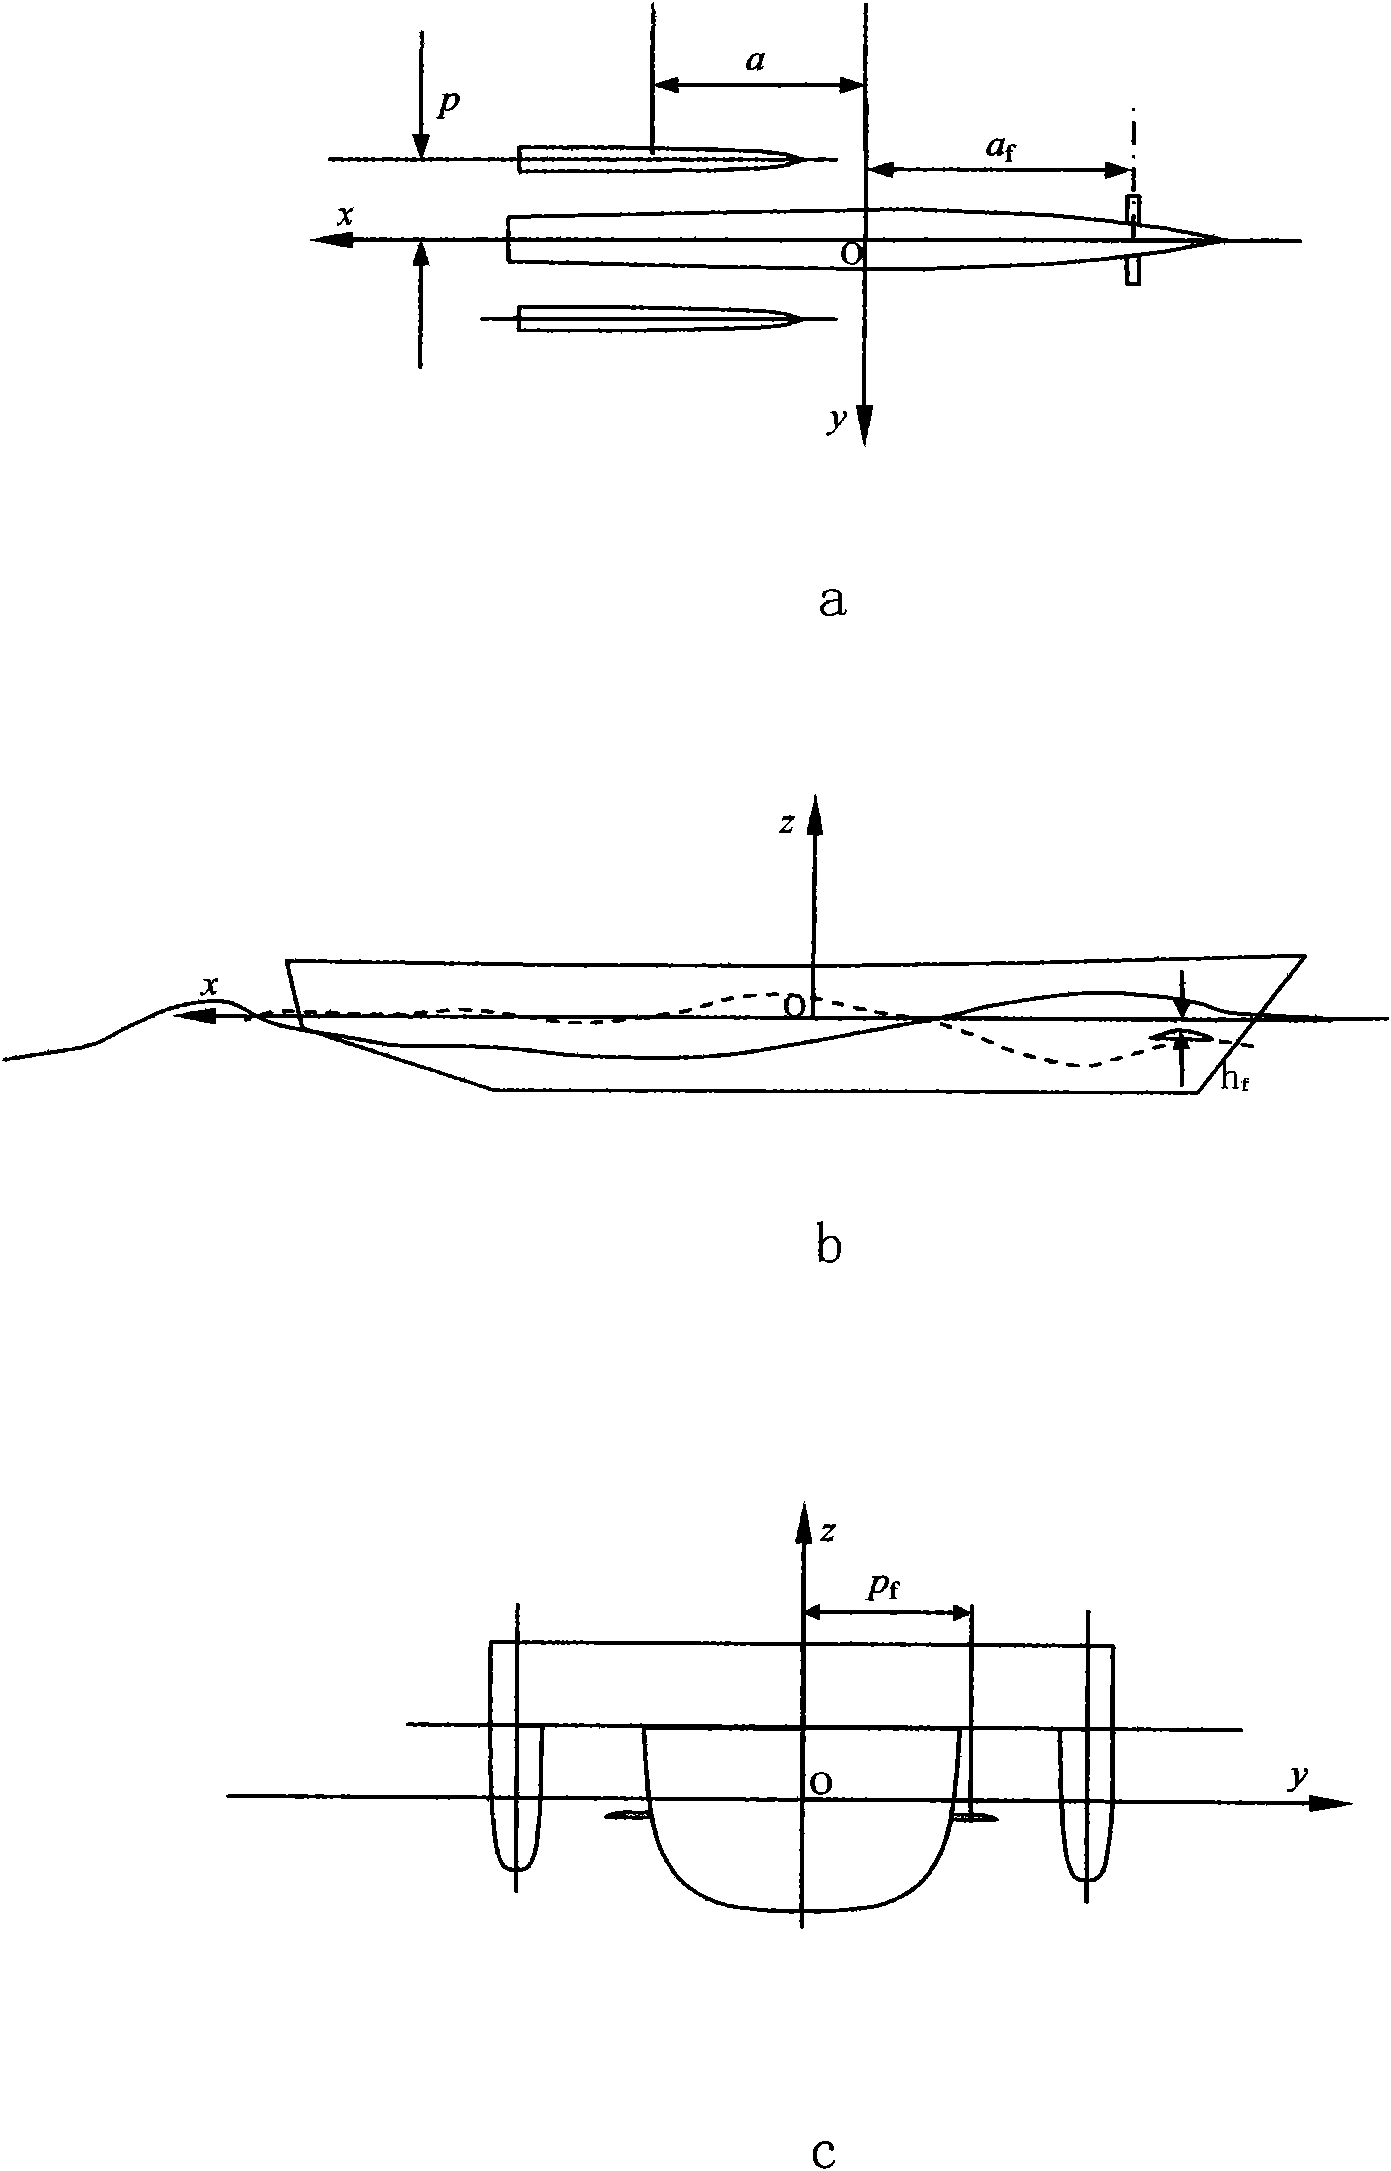 Method for damping waves and reducing resistance of high-speed trimaran by adding wing